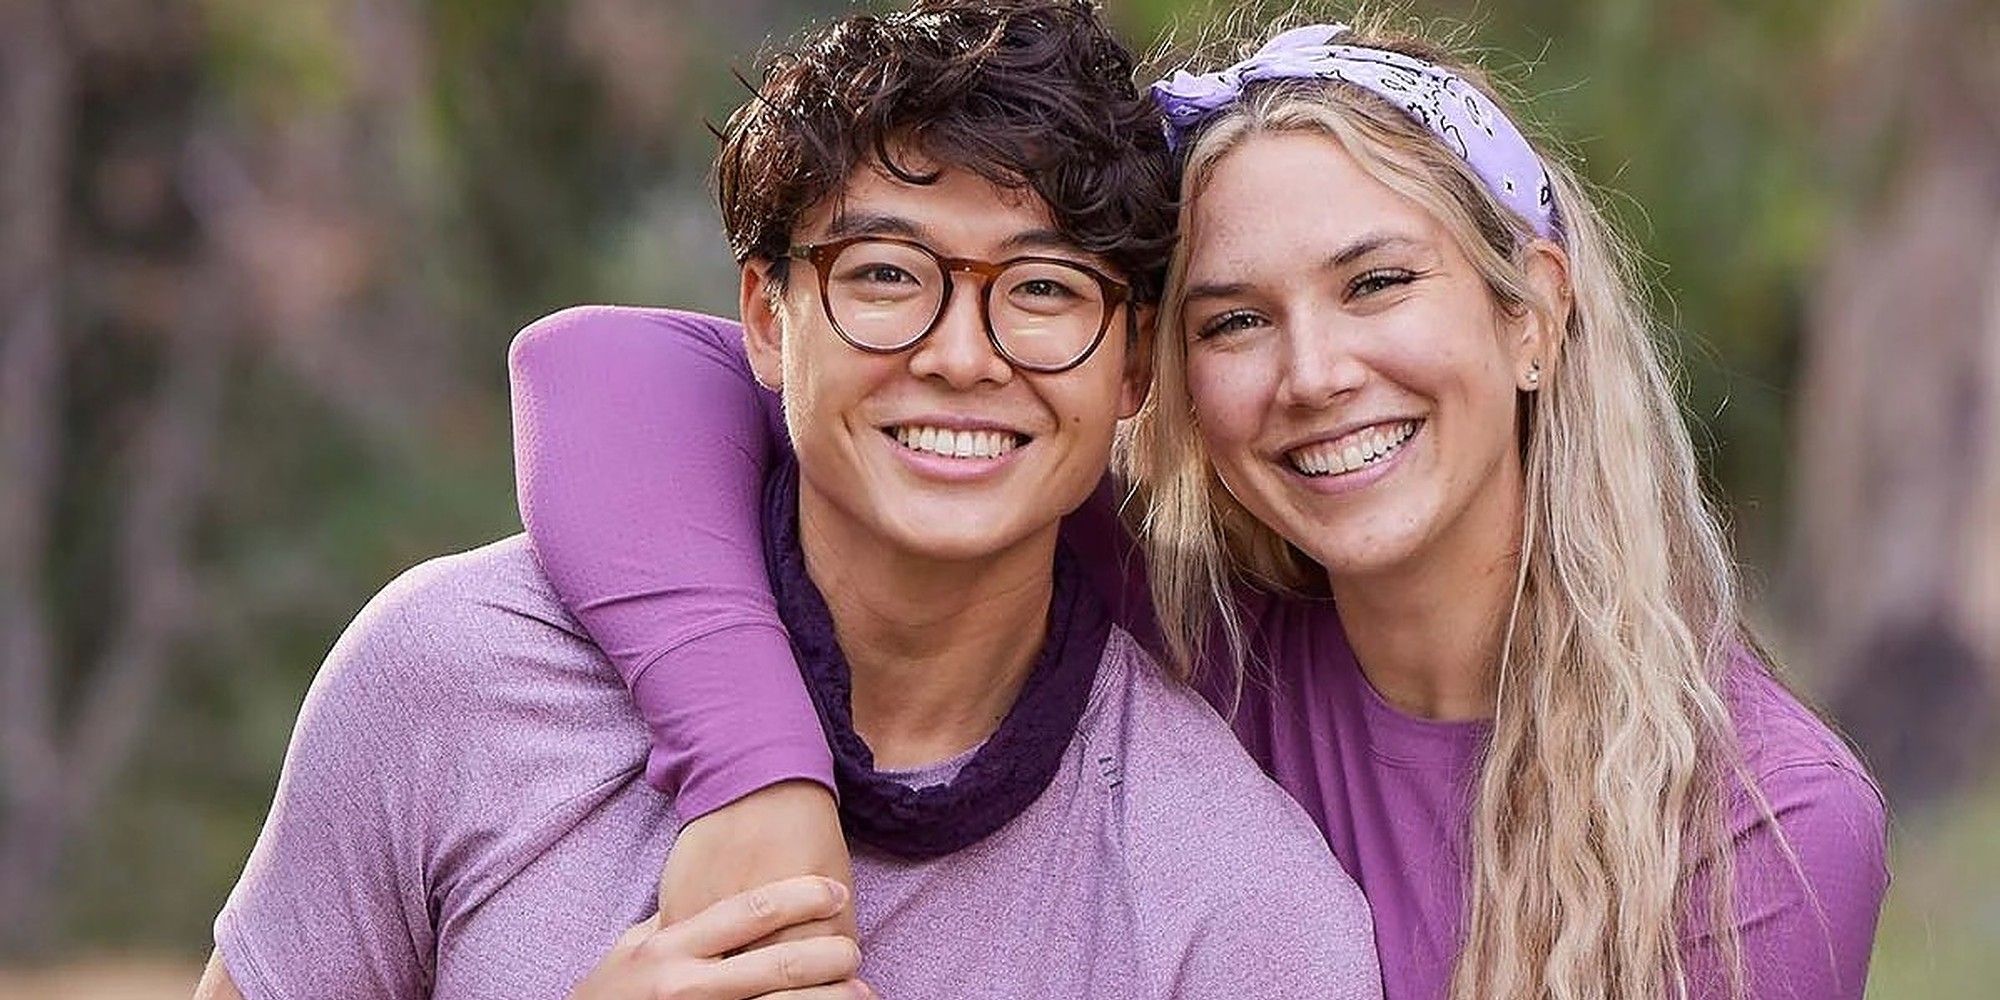 Big Brother Derek Xiao And Claire Rehfuss' Relationship Timeline